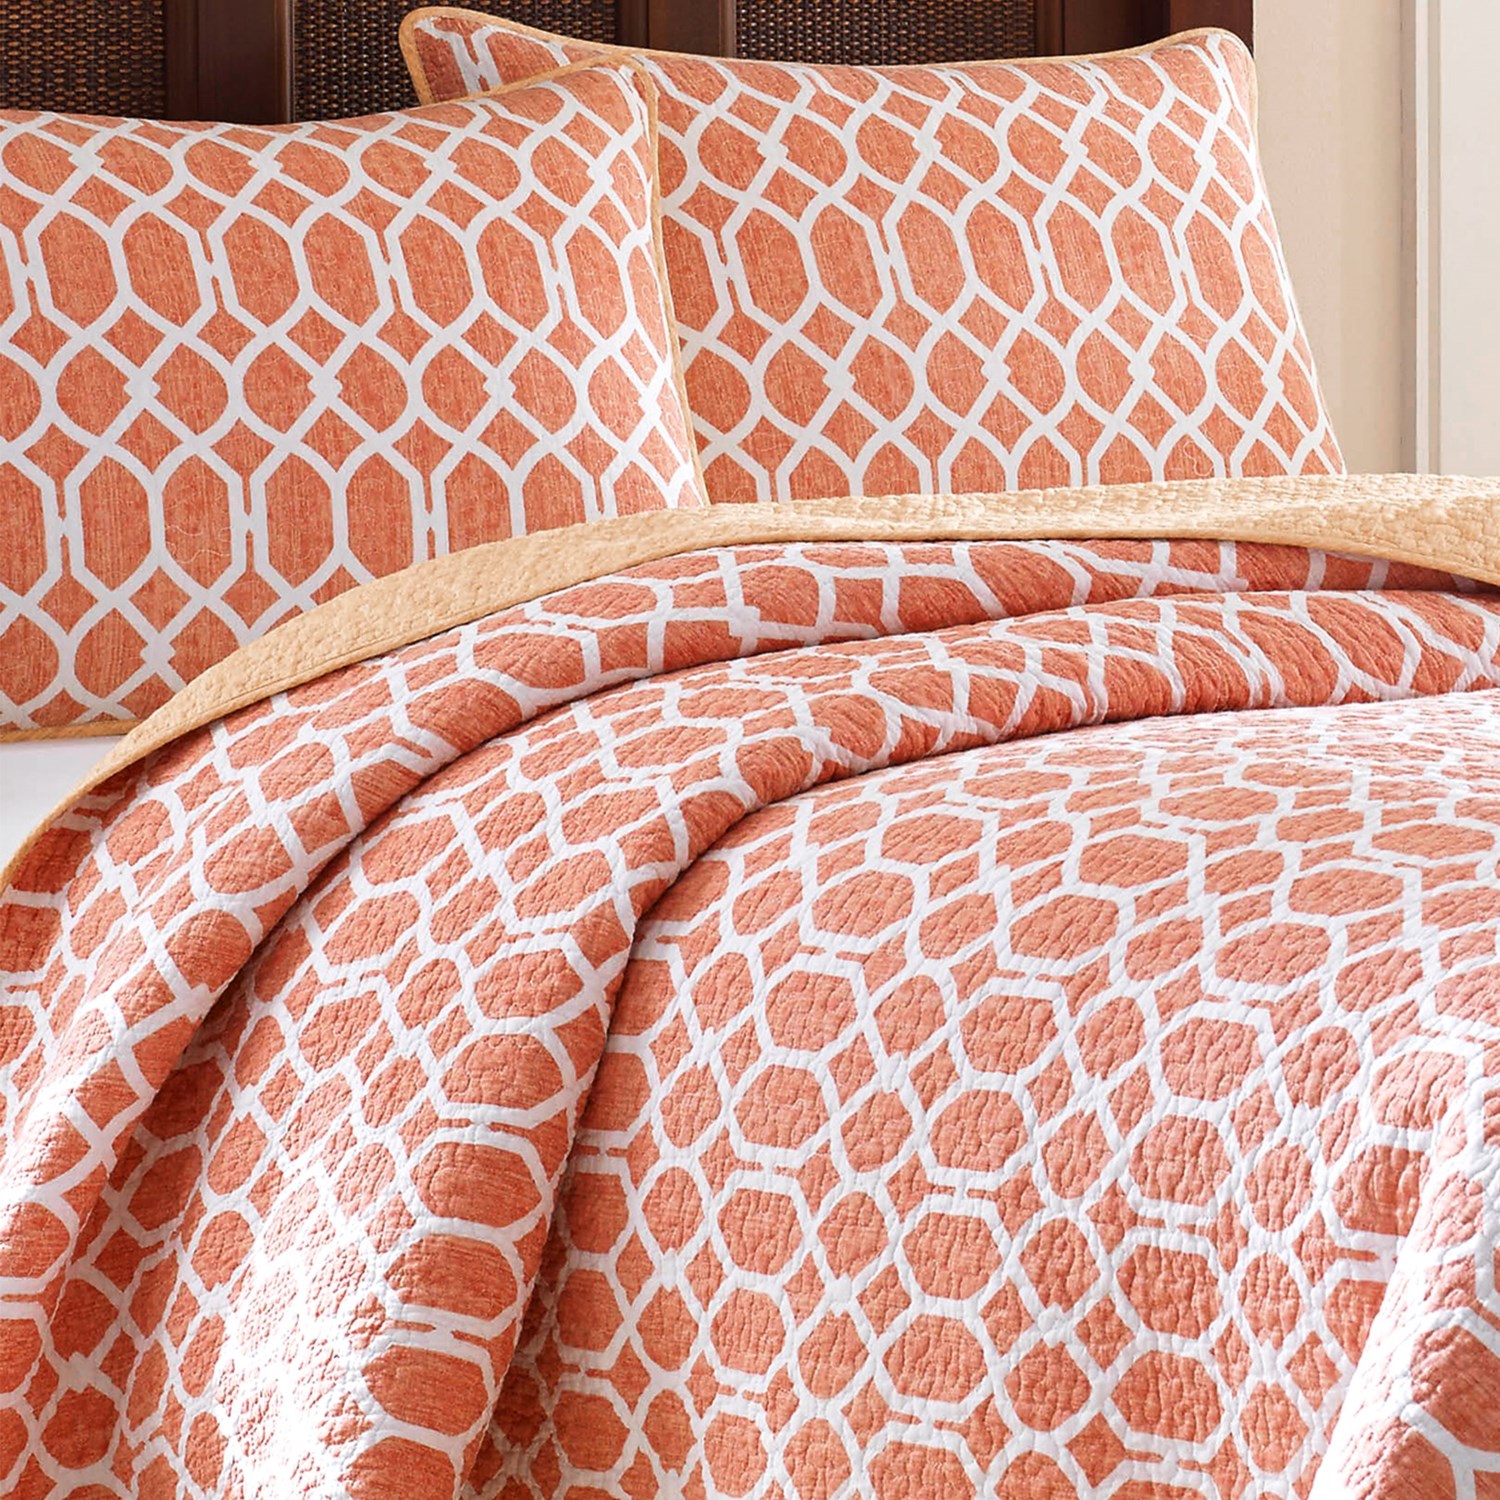 Tommy Bahama Catalina Trellis Quilt Set - Full/Queen 9614G - Save 81%